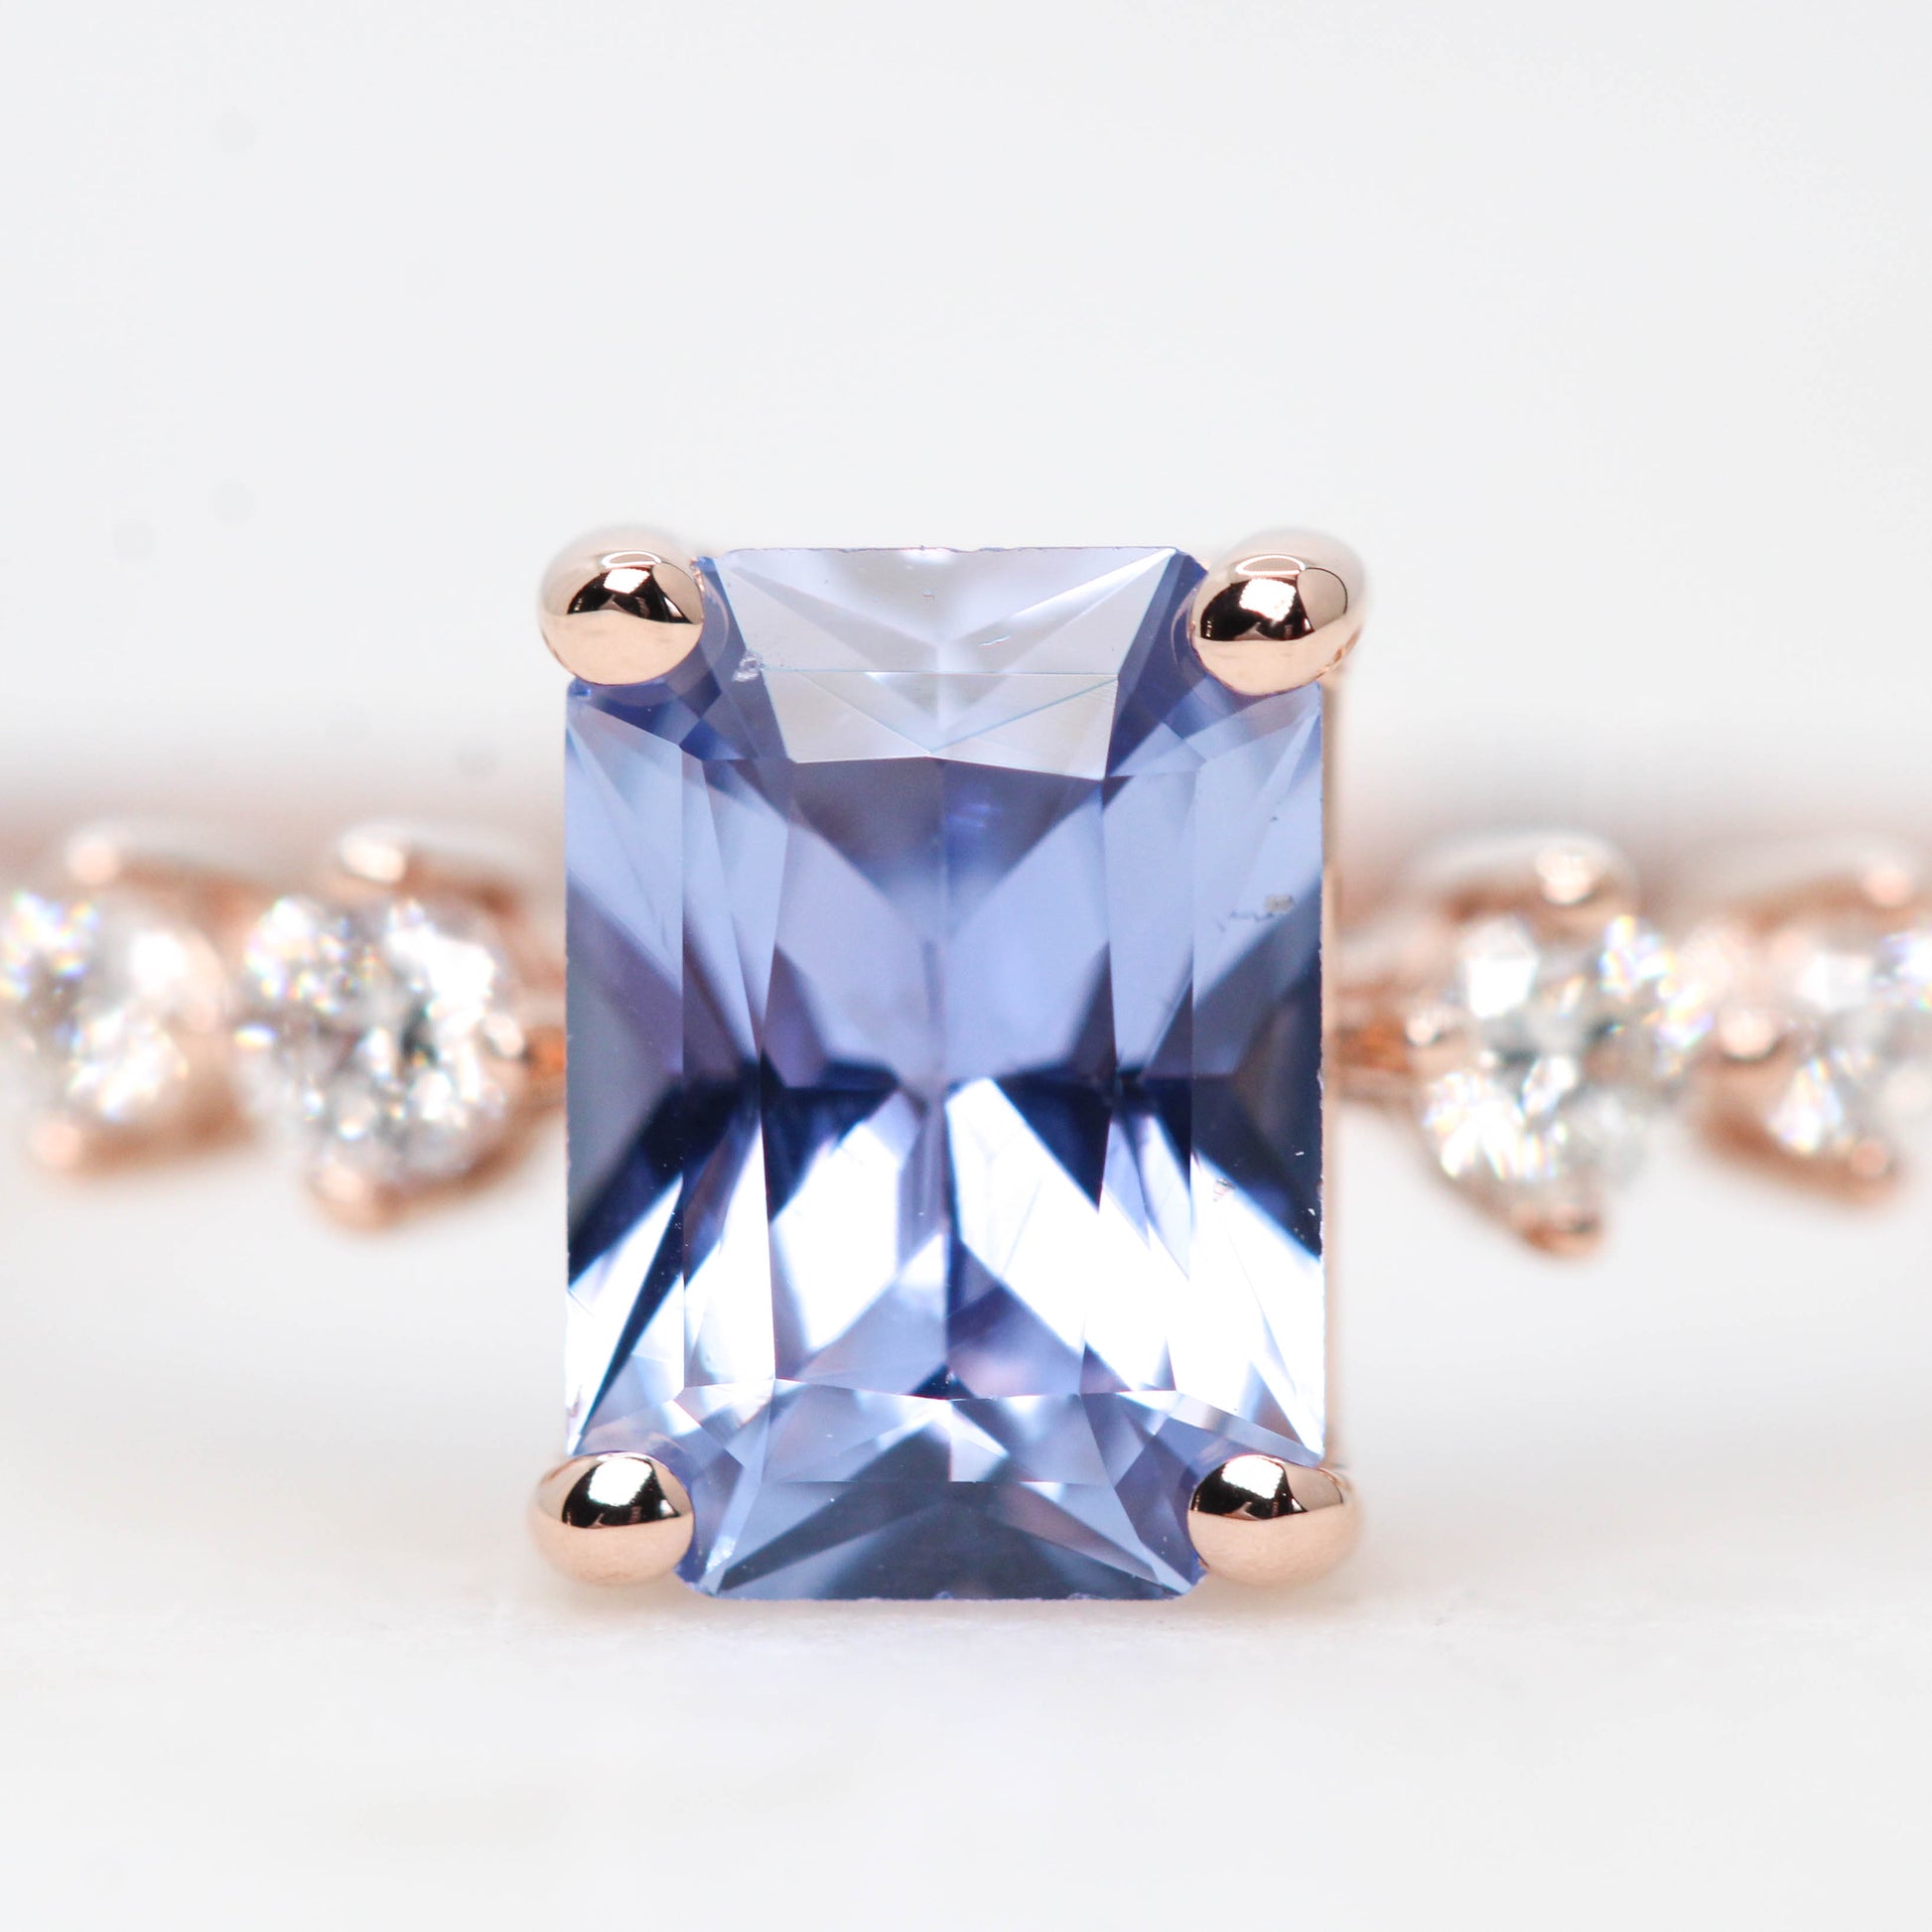 Cordelia Ring with a 0.88 Carat Blue Emerald Cut Sapphire and Diamond Accents in 14k Rose Gold - Ready to Size and Ship - Midwinter Co. Alternative Bridal Rings and Modern Fine Jewelry